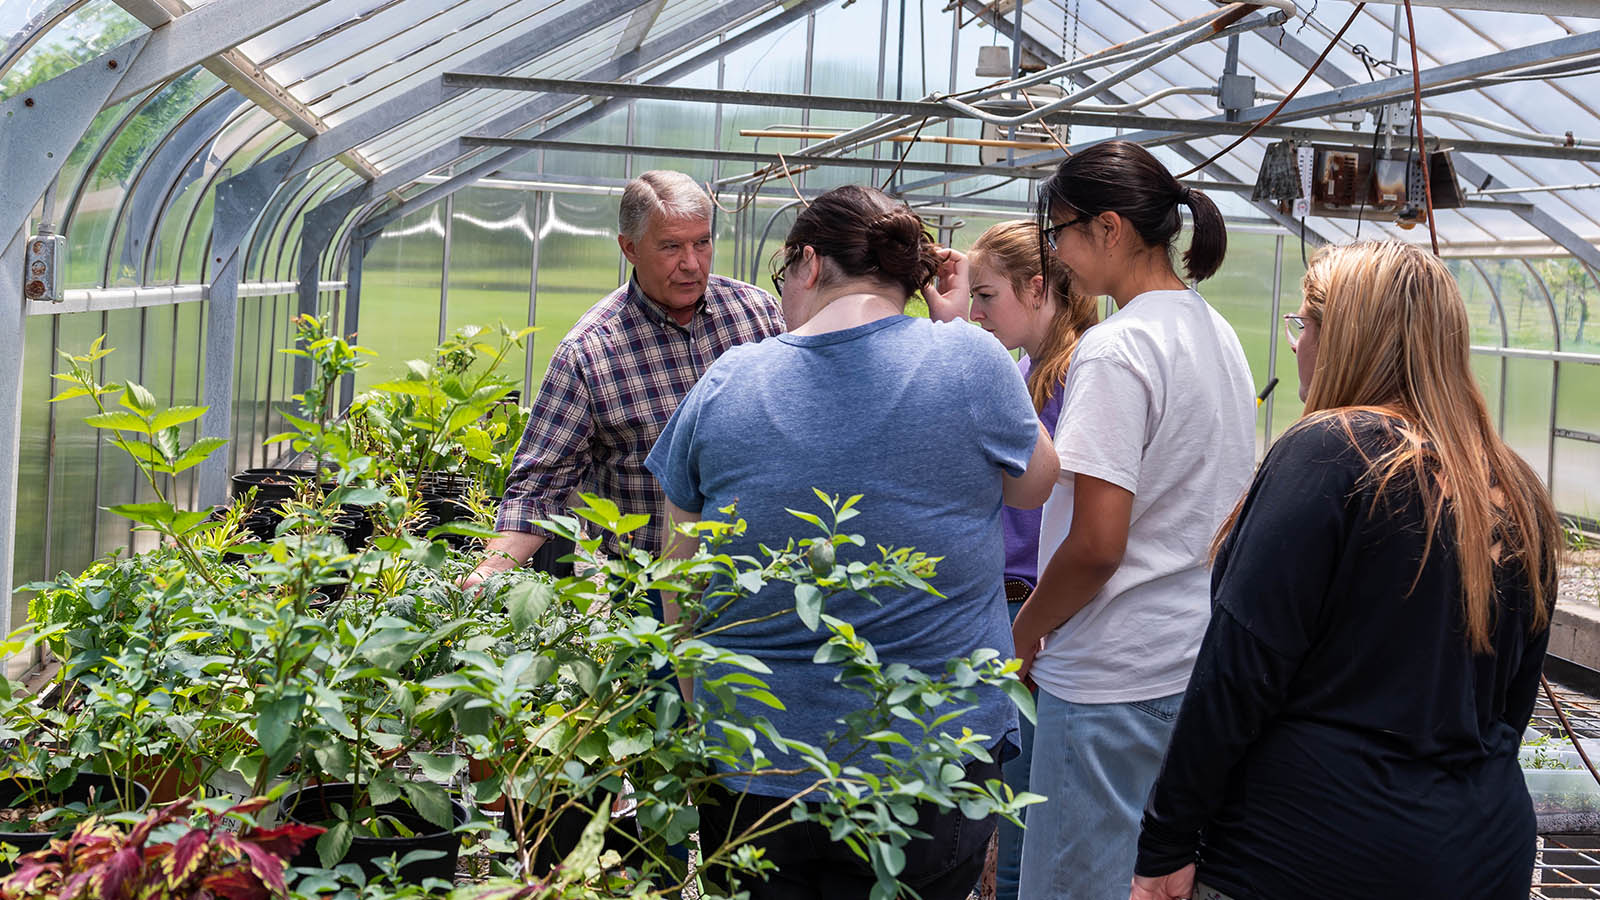 Agriculture students learning with teacher in greenhouse